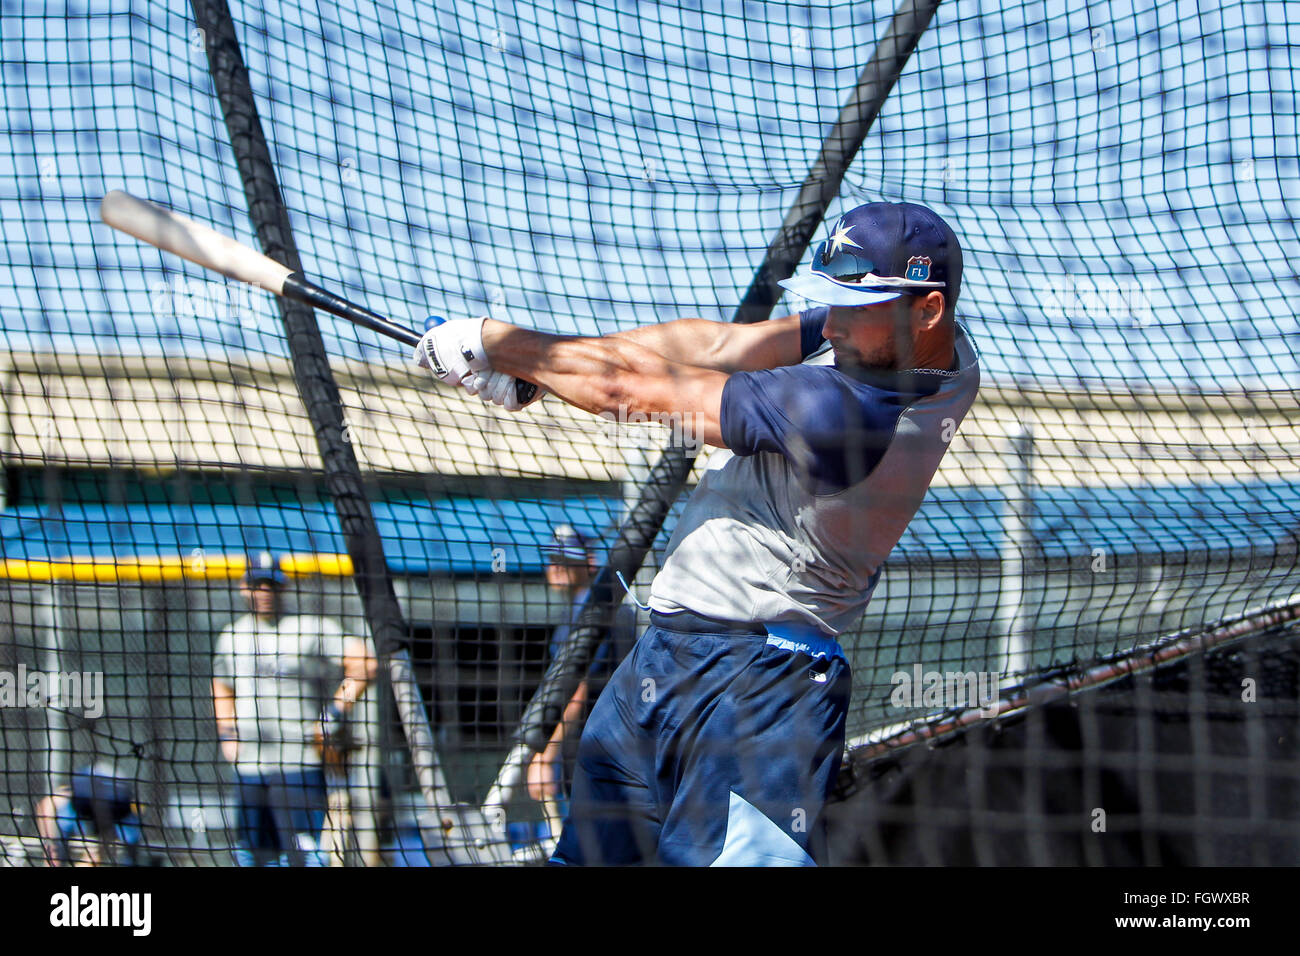 Port Charlotte, Florida, USA. 22nd Feb, 2016. WILL VRAGOVIC | Times.Tampa Bay Rays center fielder Kevin Kiermaier (39) in the batting cage during Rays Spring Training at Charlotte Sports Park in Port Charlotte, Fla. on Monday, Feb. 22, 2016. © Will Vragovic/Tampa Bay Times/ZUMA Wire/Alamy Live News Stock Photo